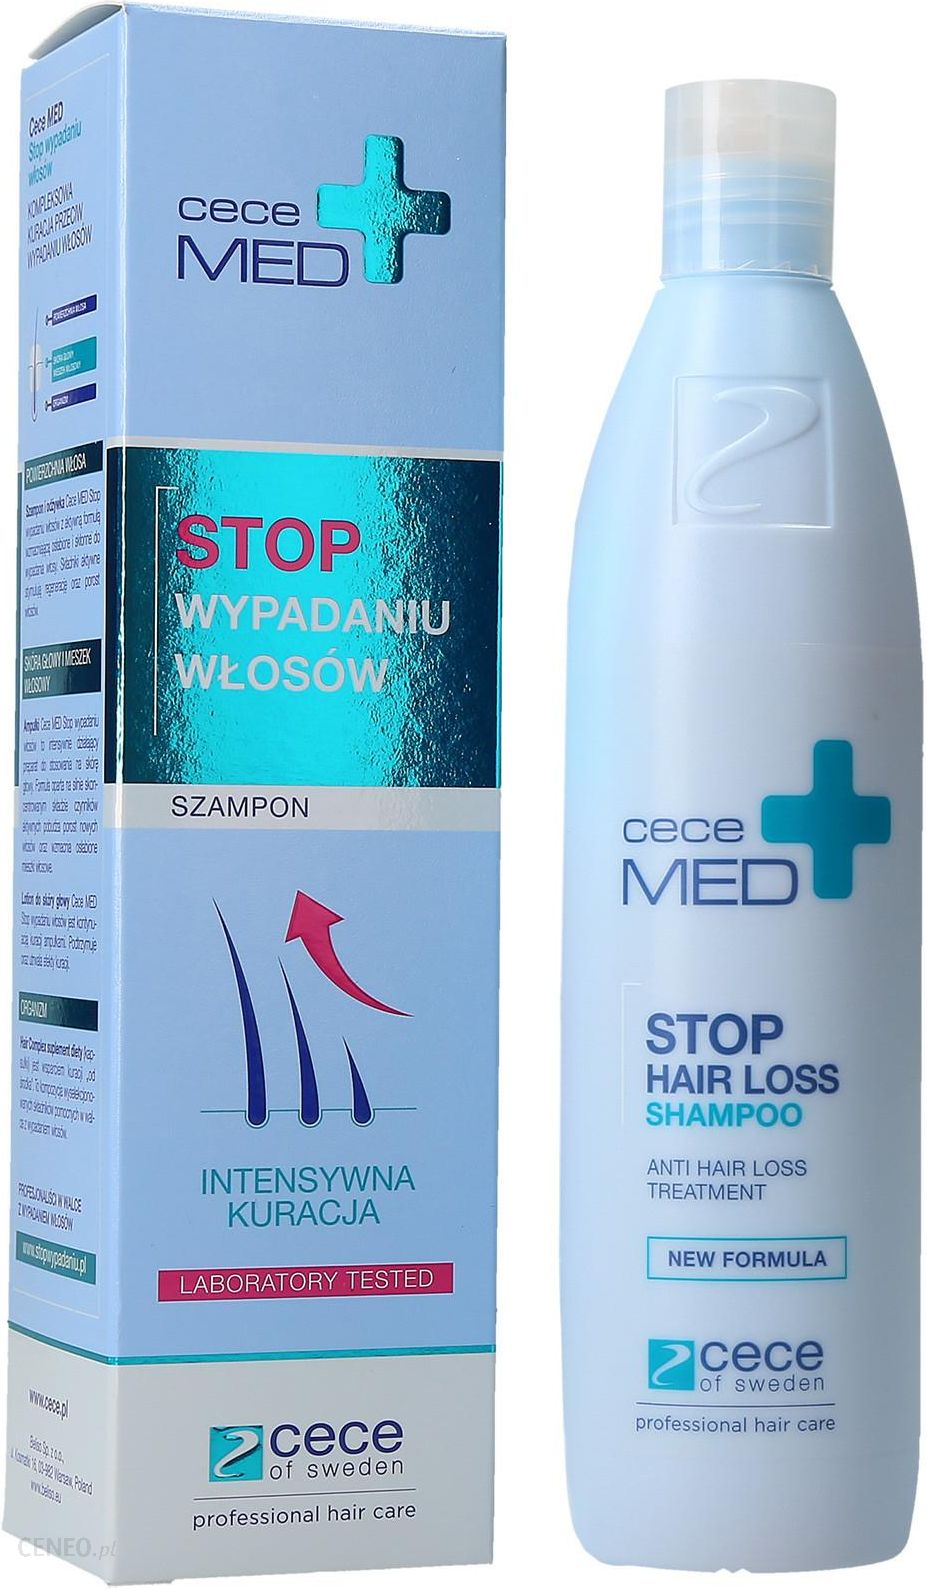 cece of sweden prevent hair loss szampon opinie